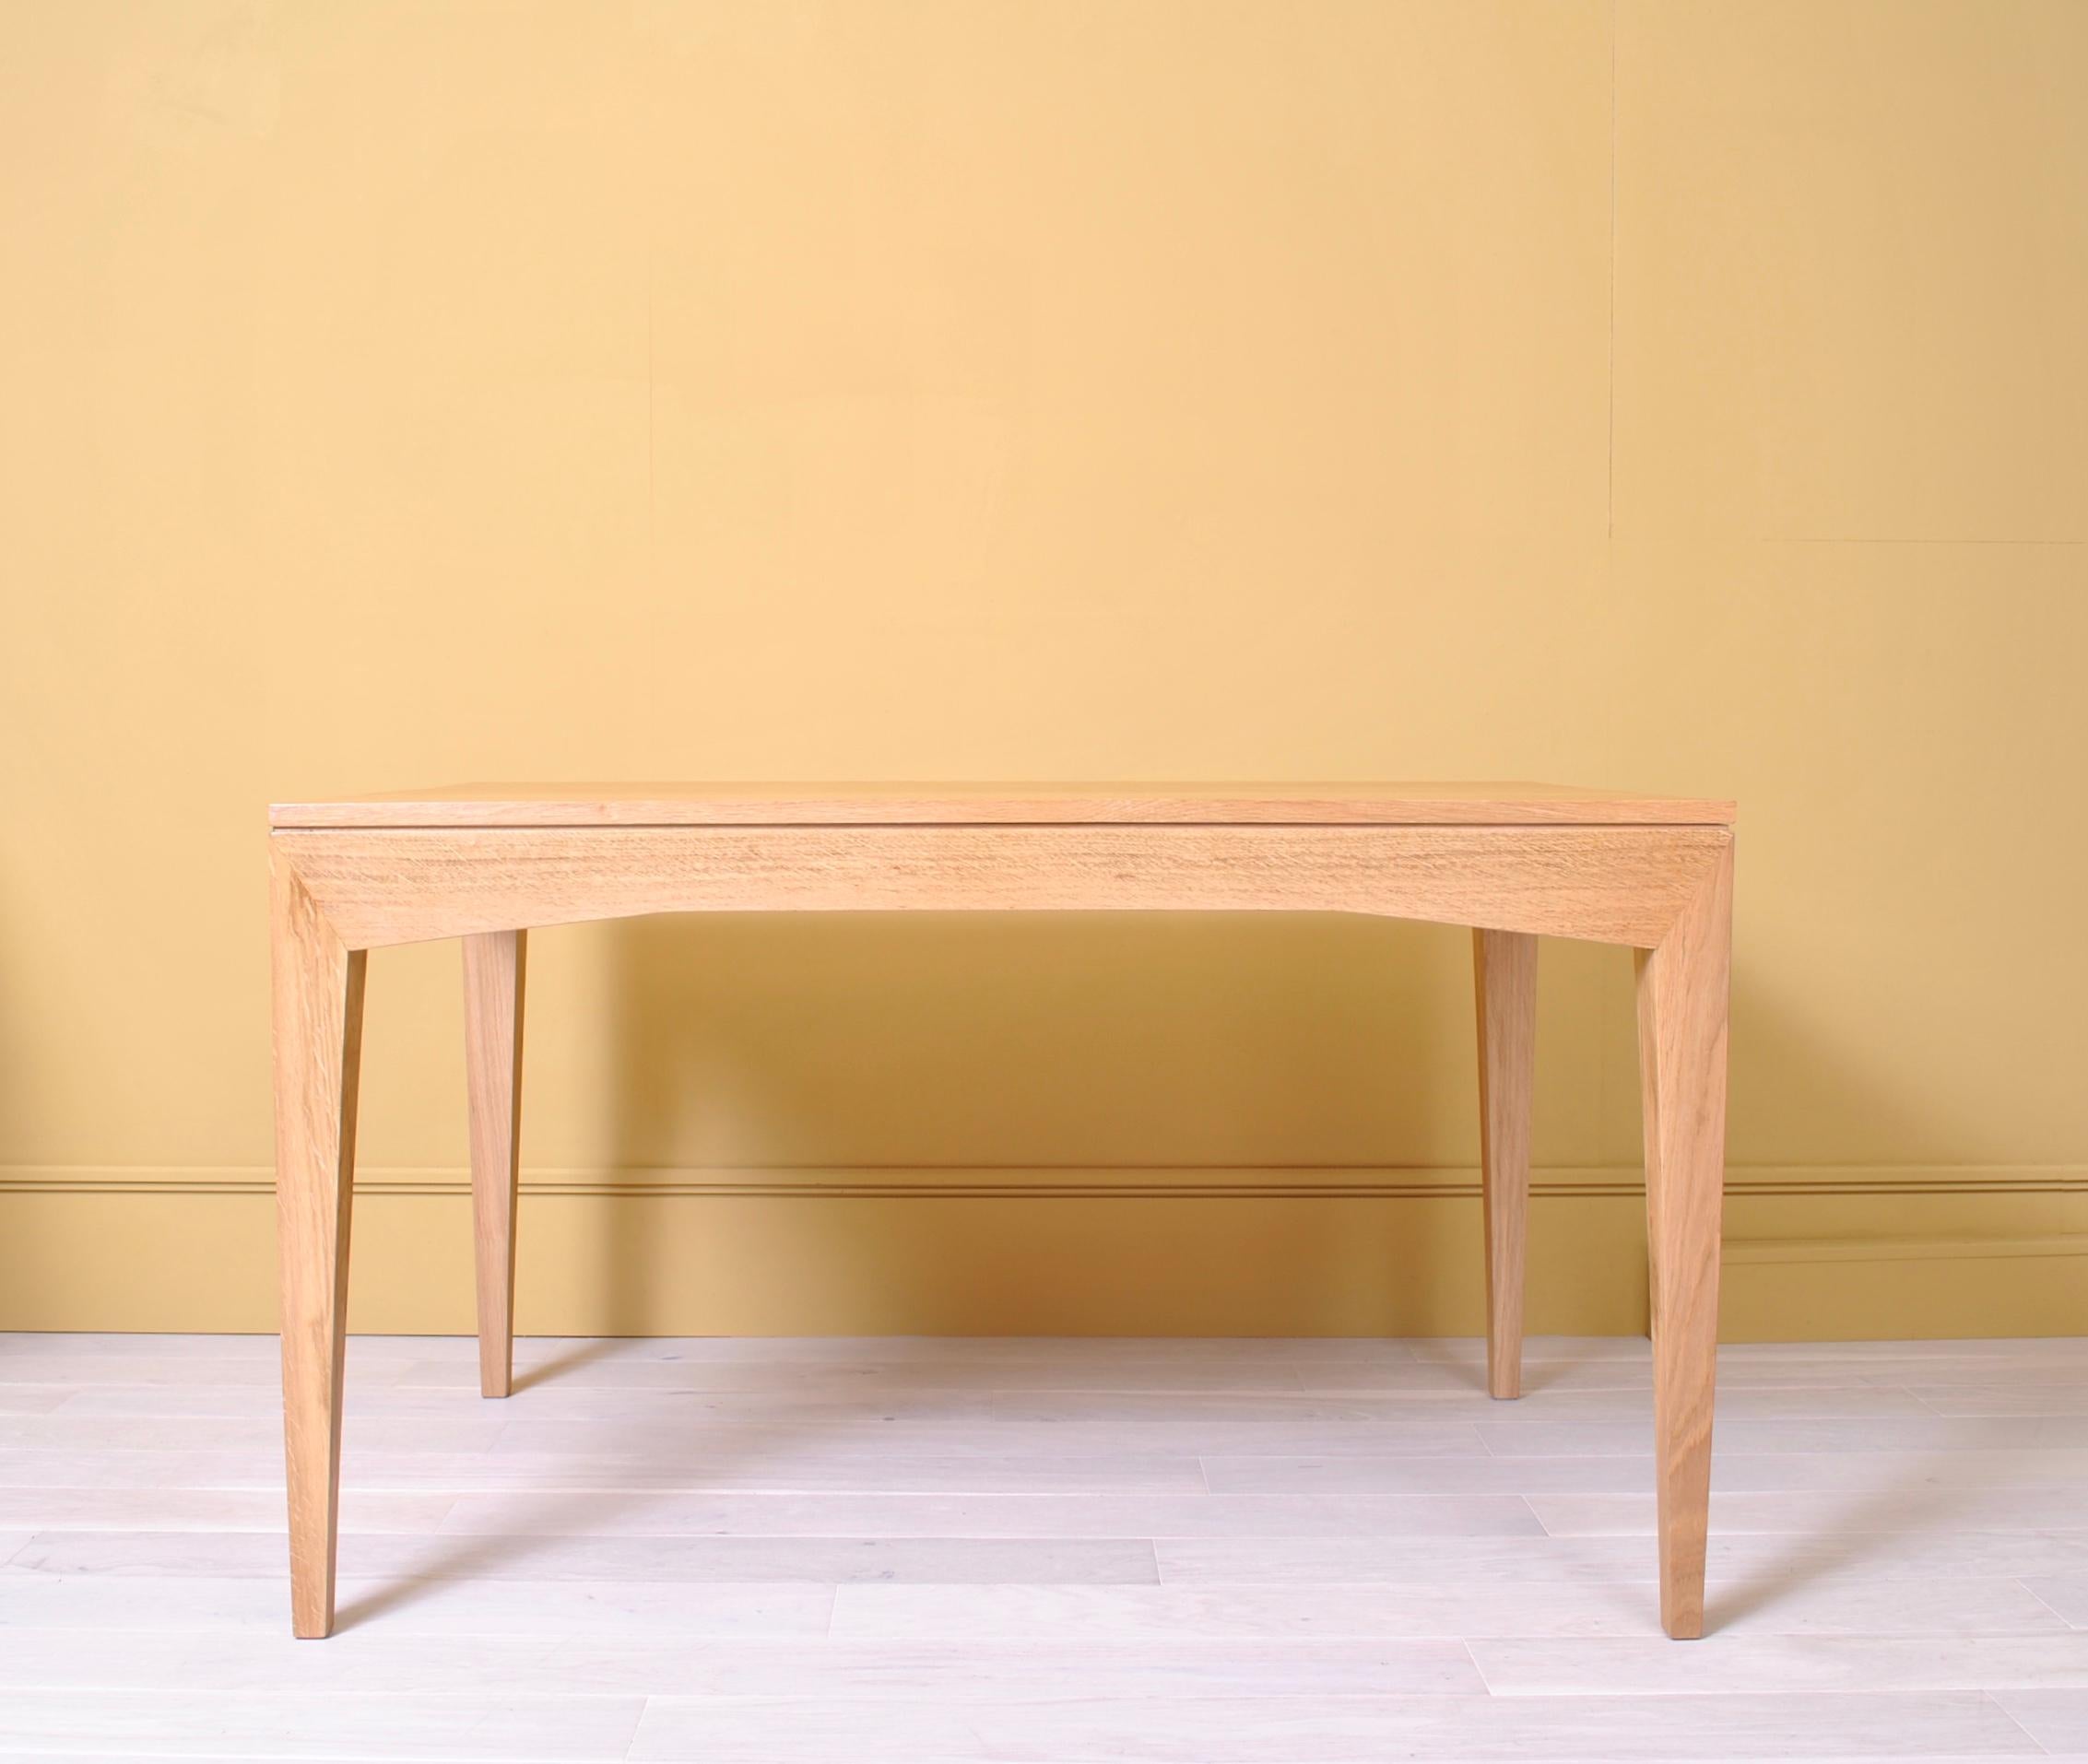 A sleek handmade English modernist desk or writing table. Constructed with a traditional 3 wide solid board surface on beautifully visible acute angled leg and frame. Handcrafted by traditional furniture craftsmen in England from fully Quarter sawn